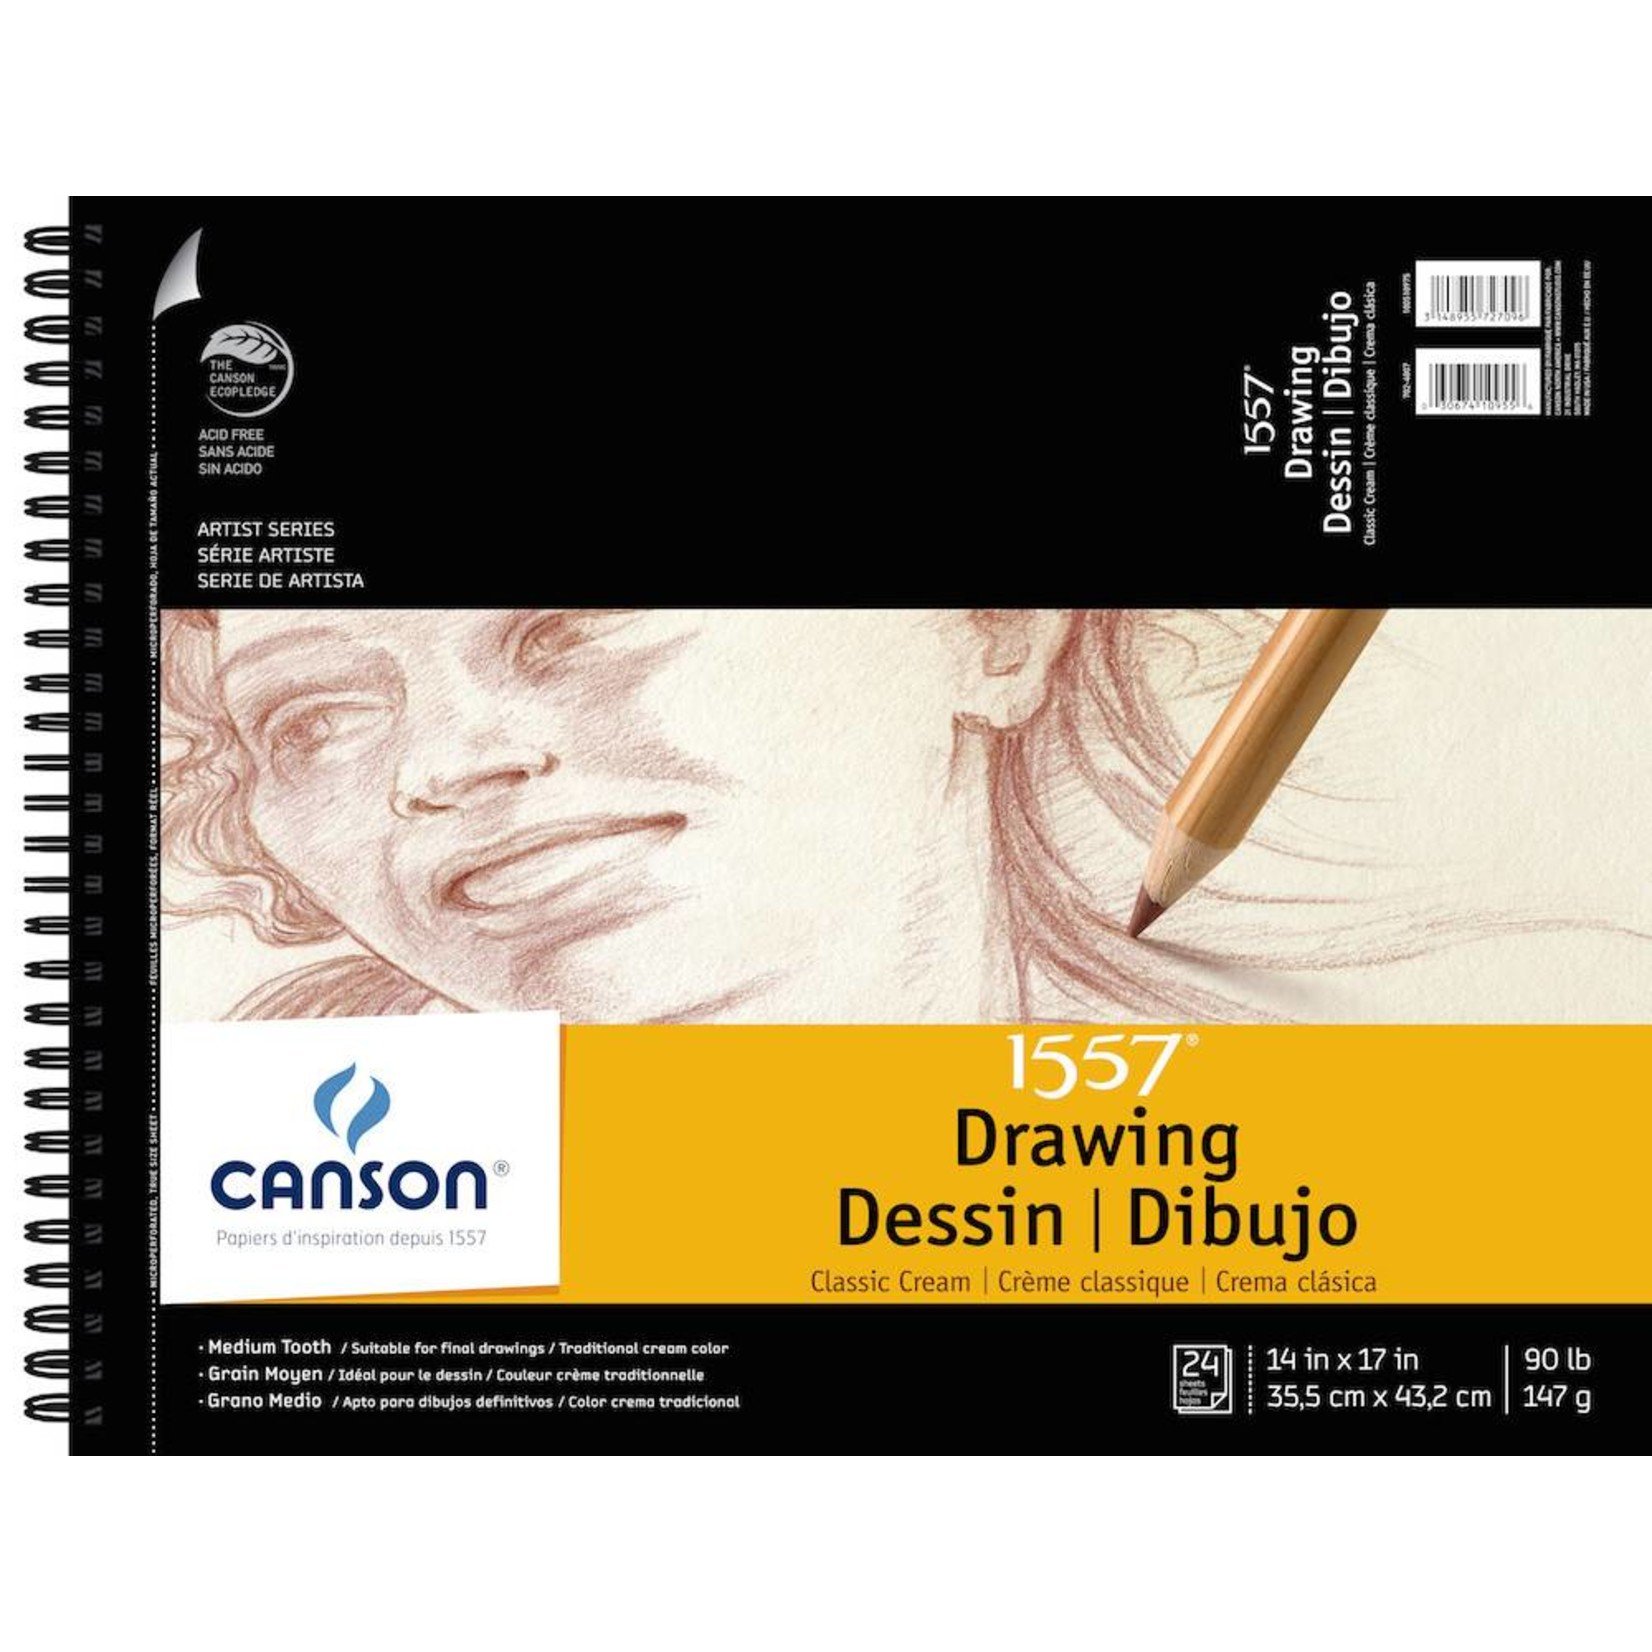 CANSON CANSON 1557 CLASSIC CREAM DRAWING PAD 14X17 90LB SIDE COIL  24/SHT    100510975